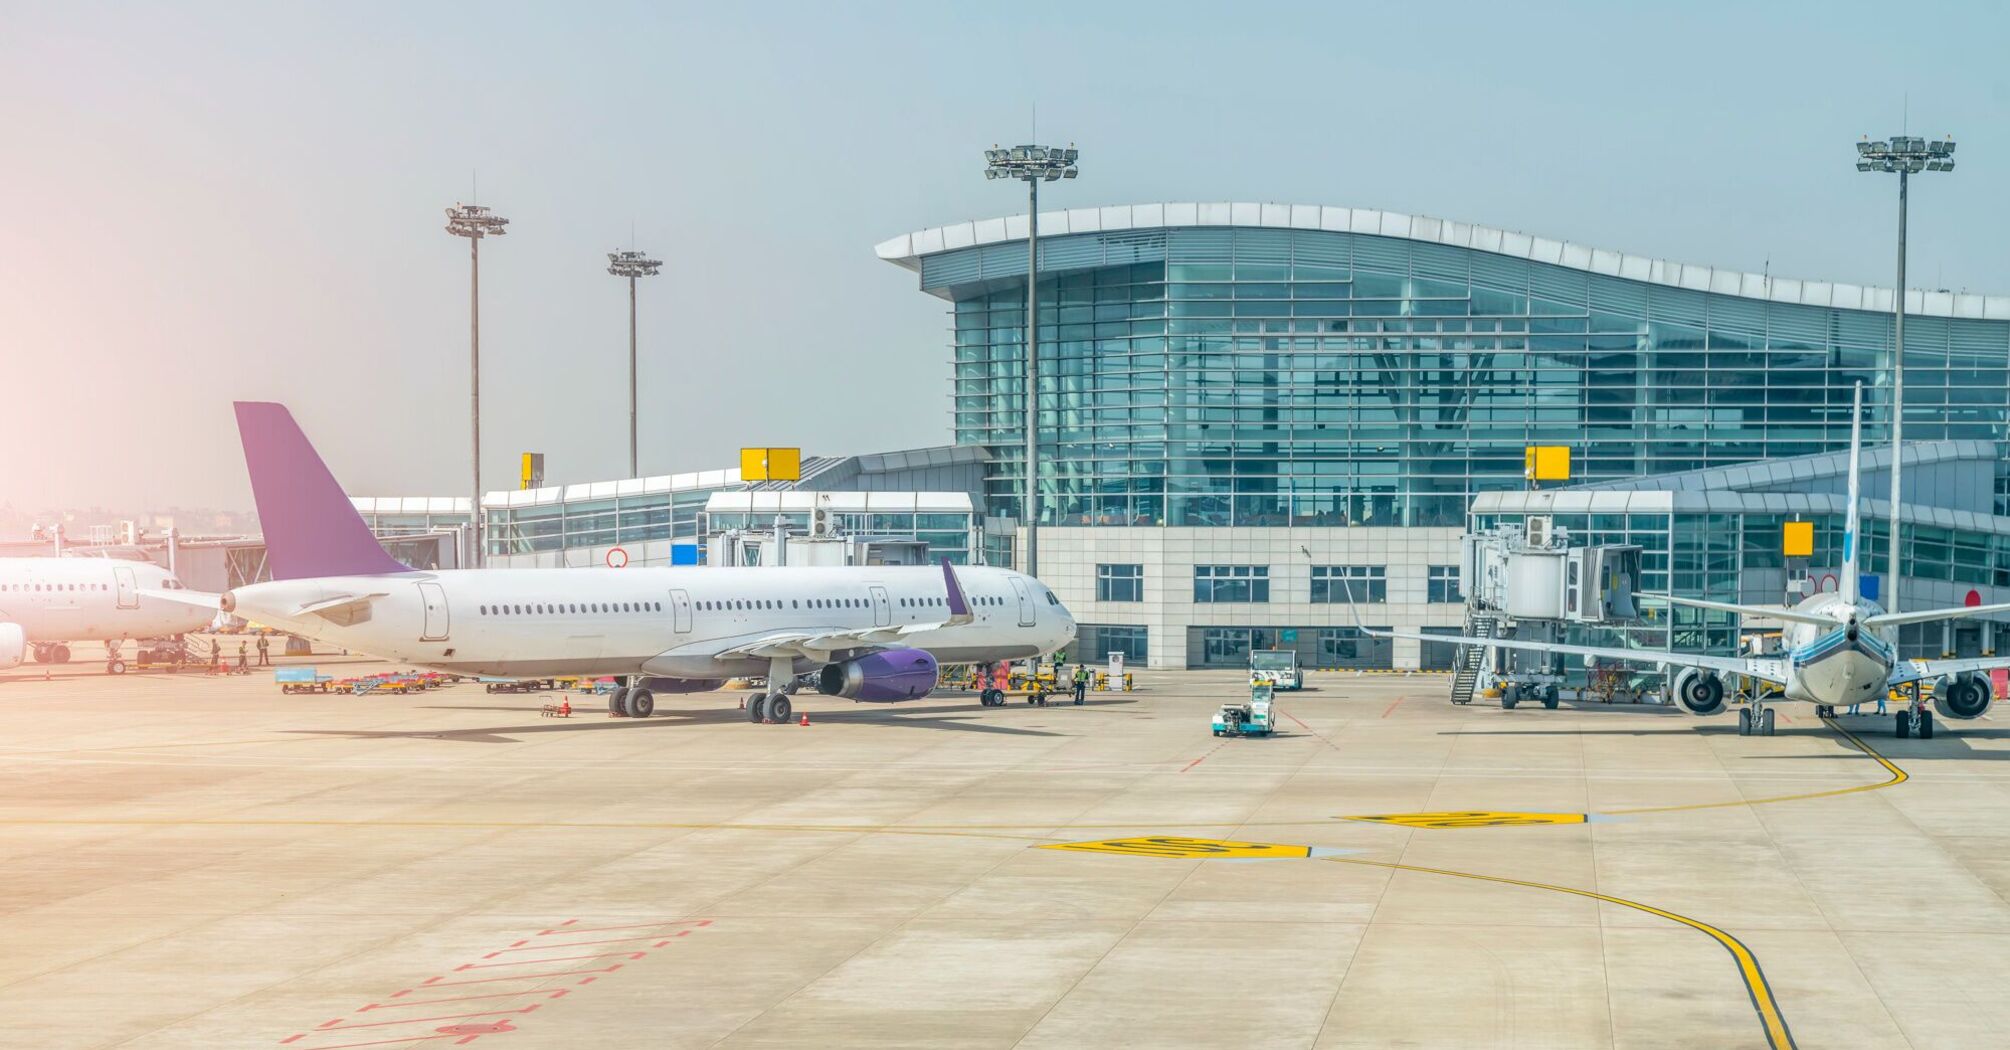 Due to the implementation of environmental initiatives, Heathrow Airport is losing its capacity